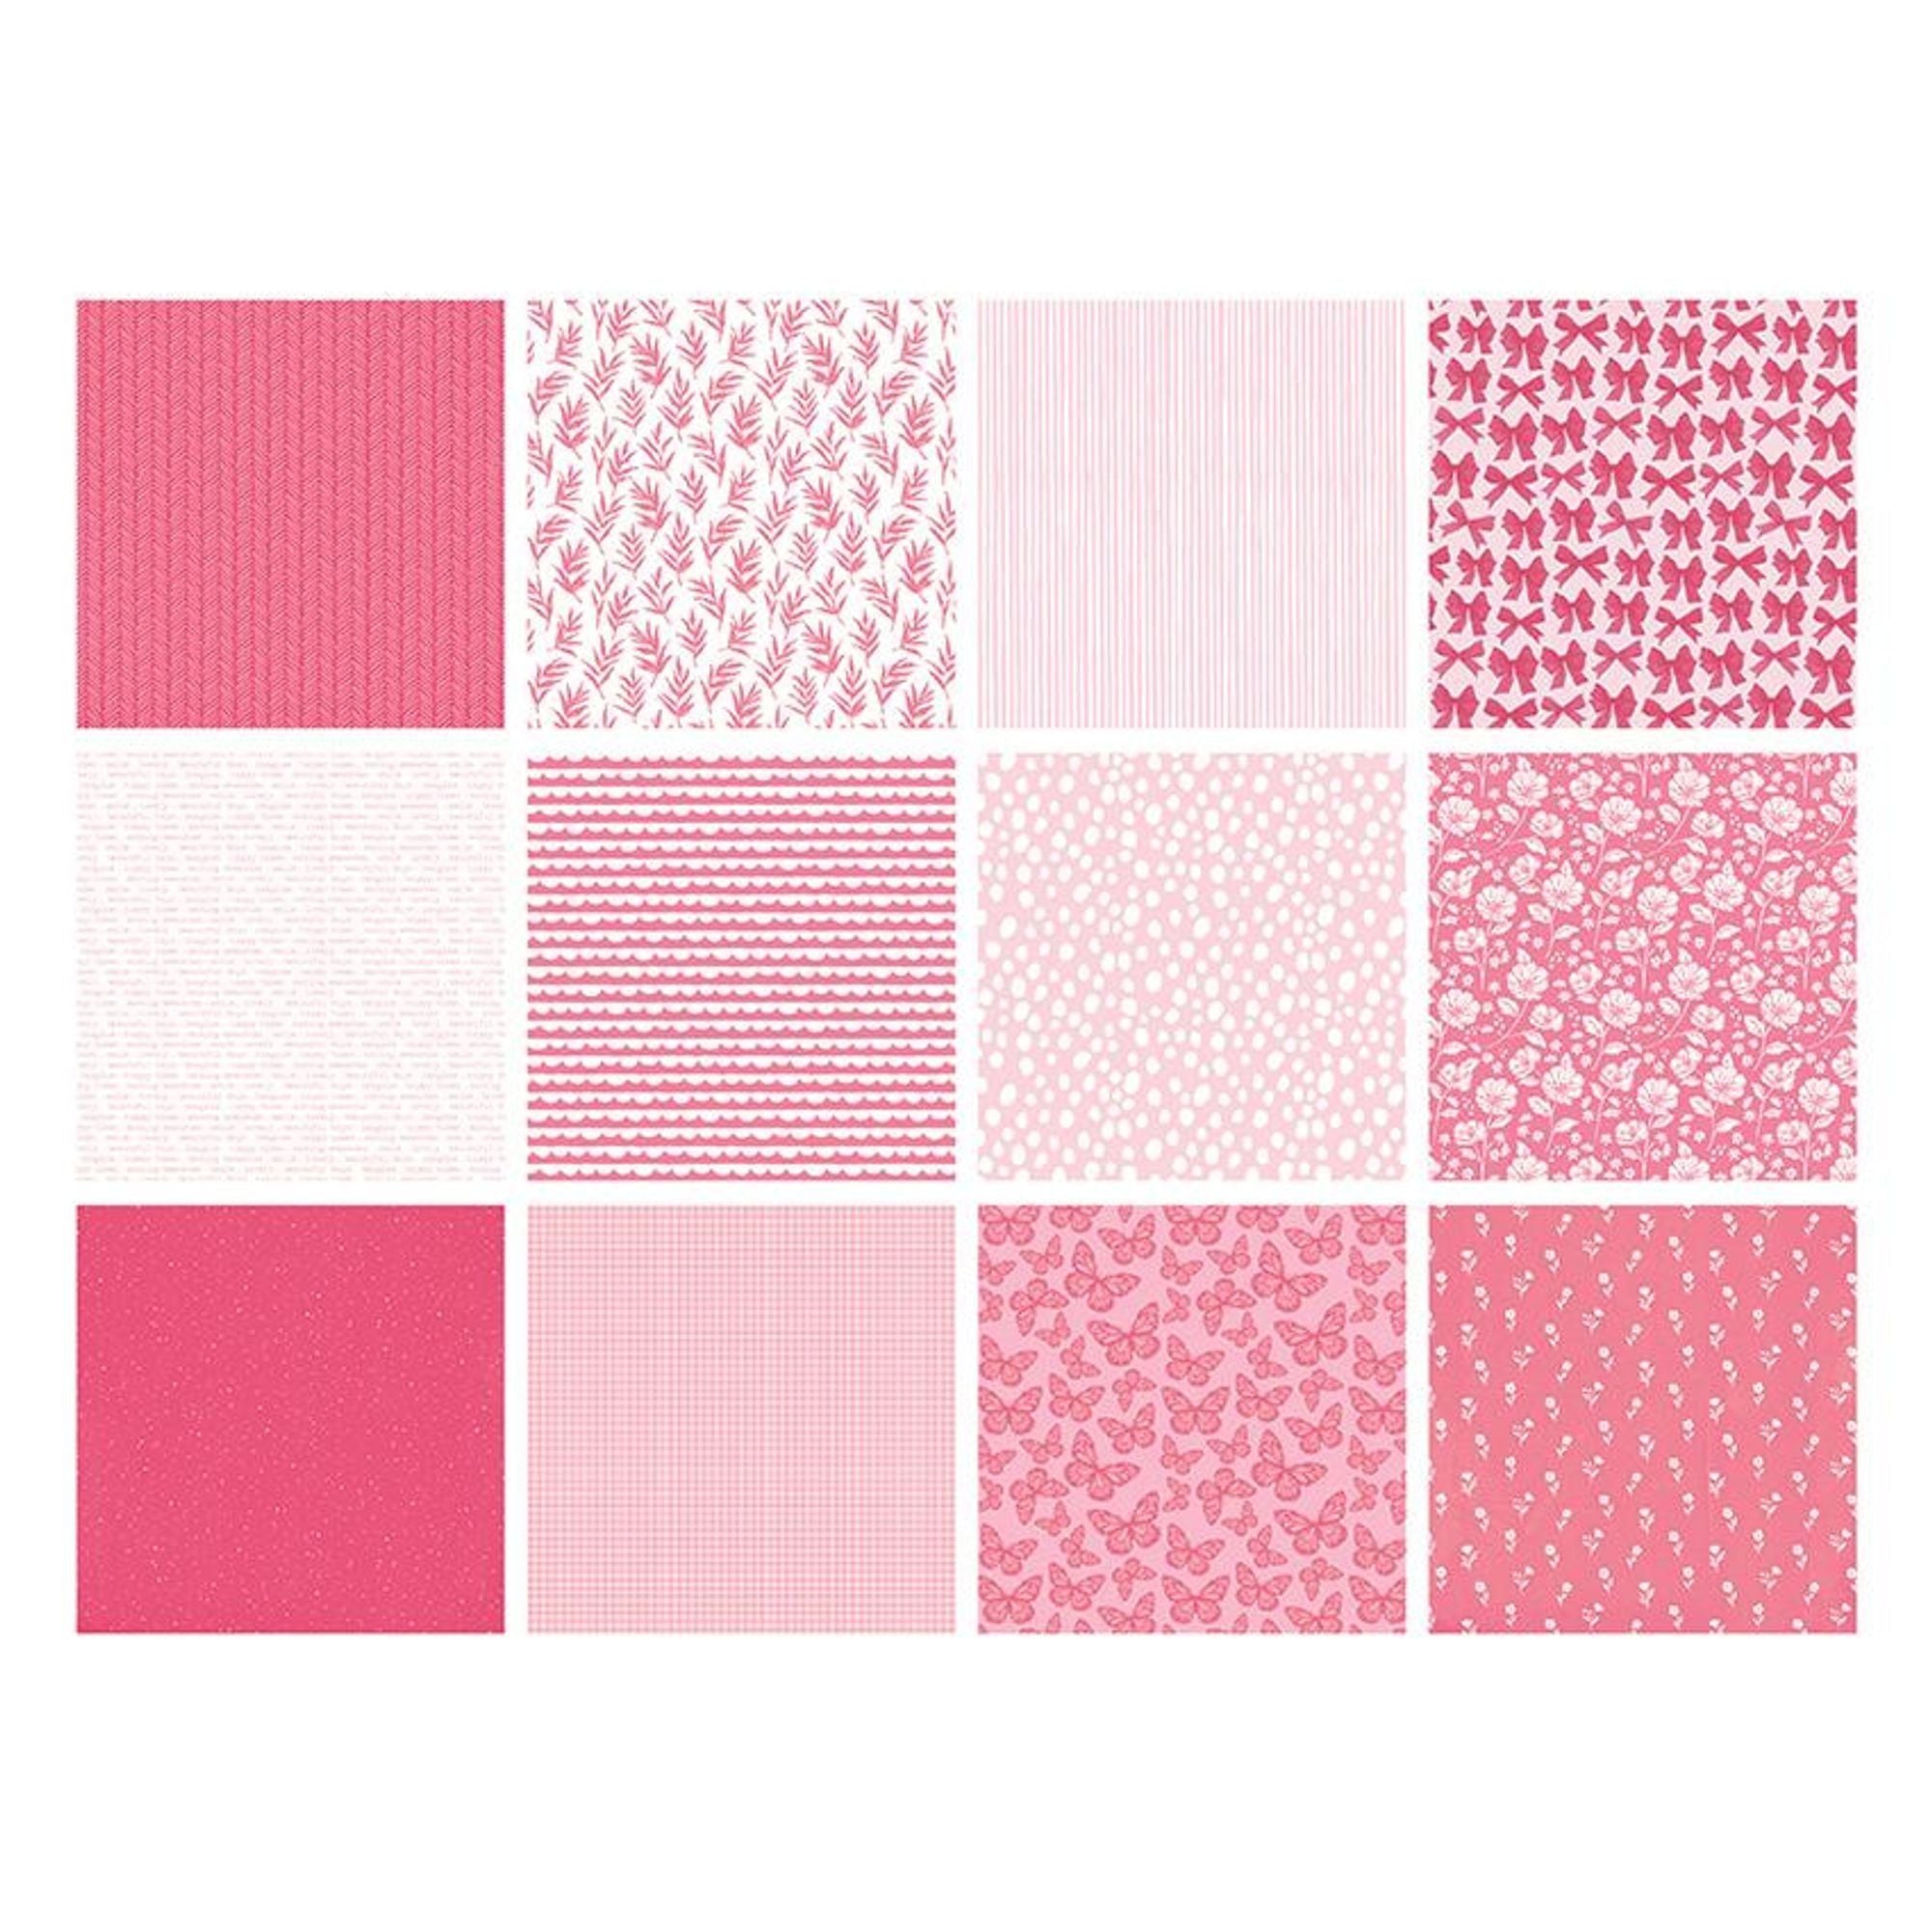 The Paper Boutique Everyday - Shades Of - Pink 8 in x 8 in Pad